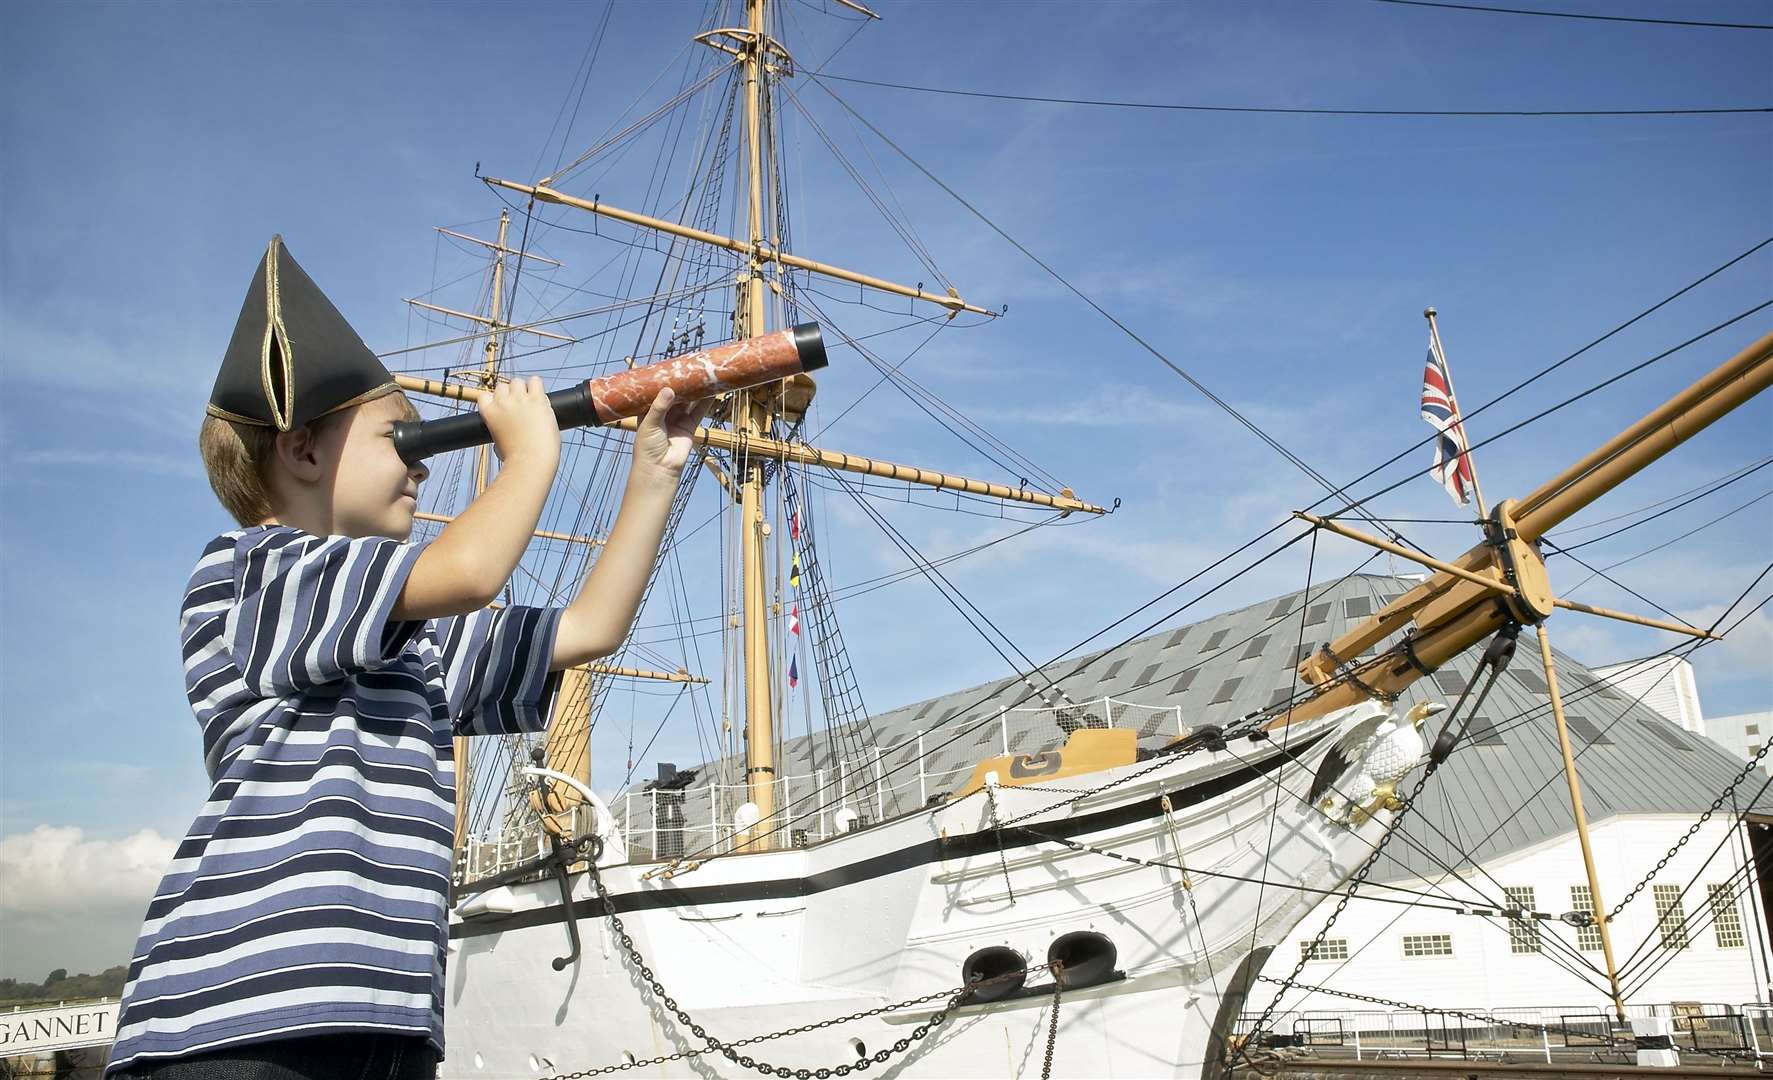 Learn about maritime history at the dockyard